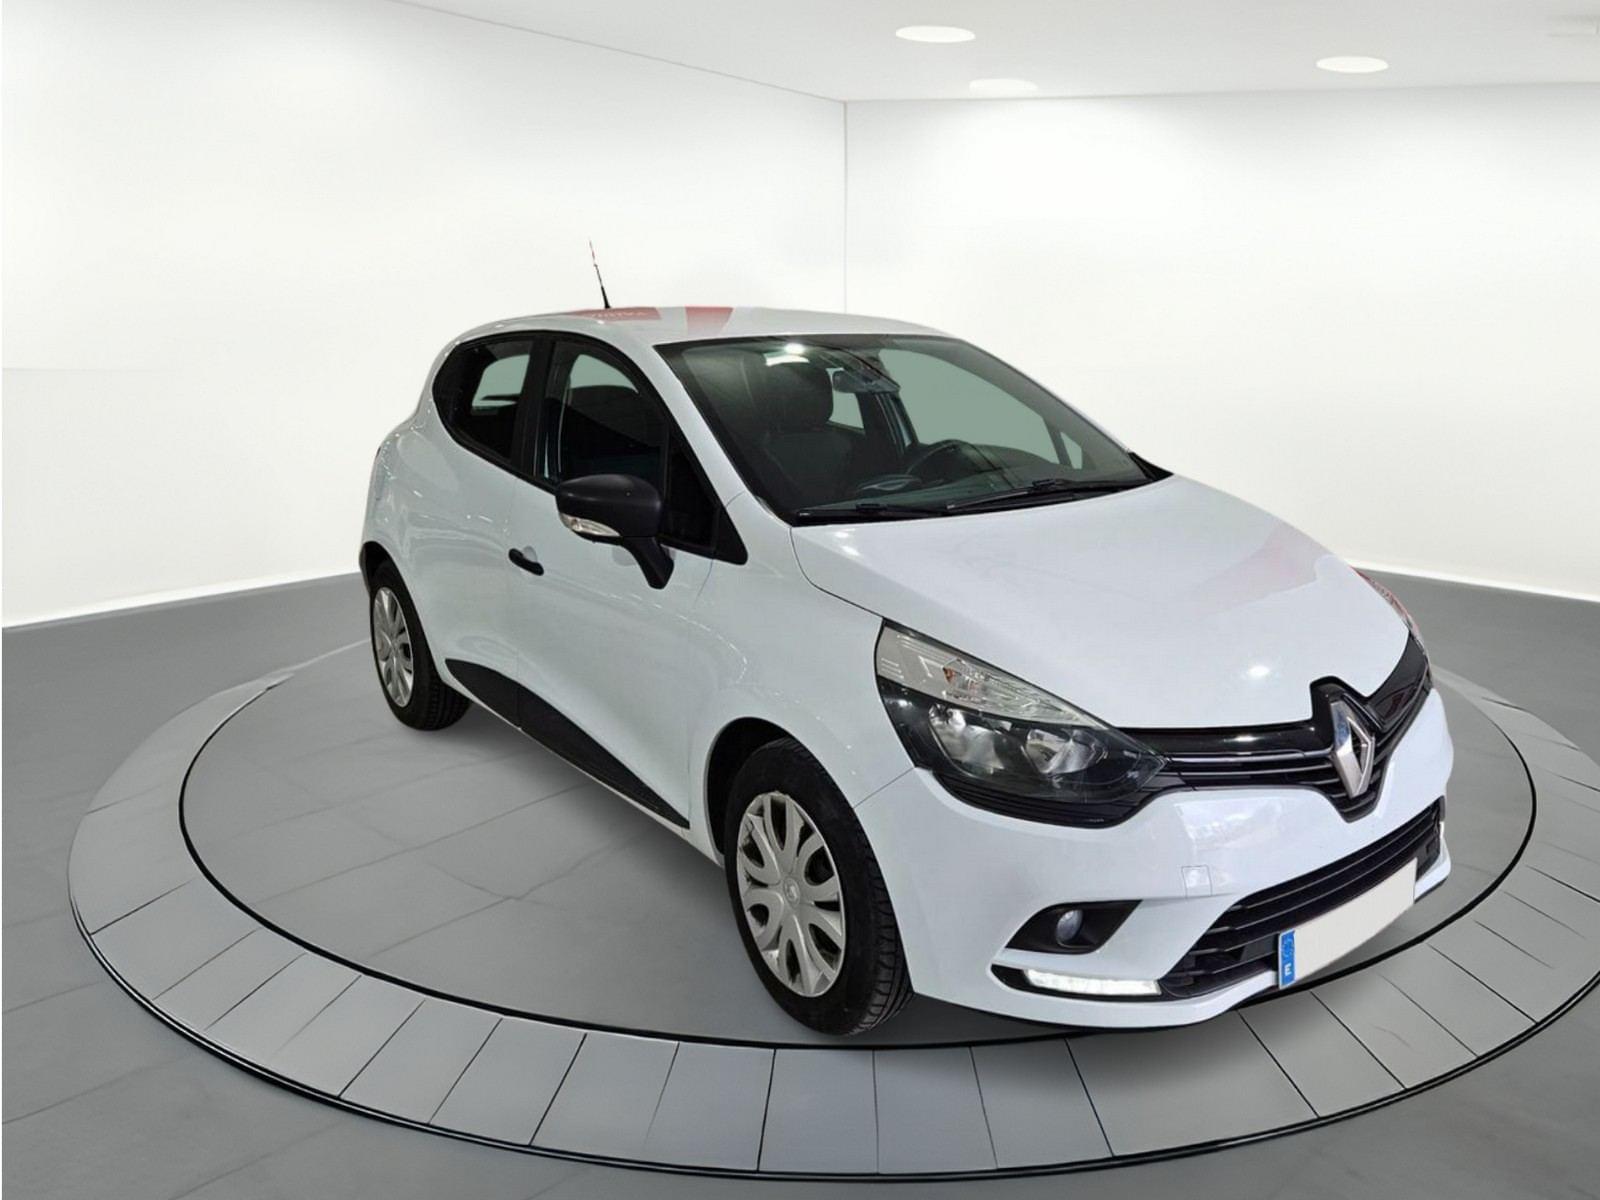 RENAULT CLIO 1.5 DCI SS ENERGY BUSINESS 55KW 3 